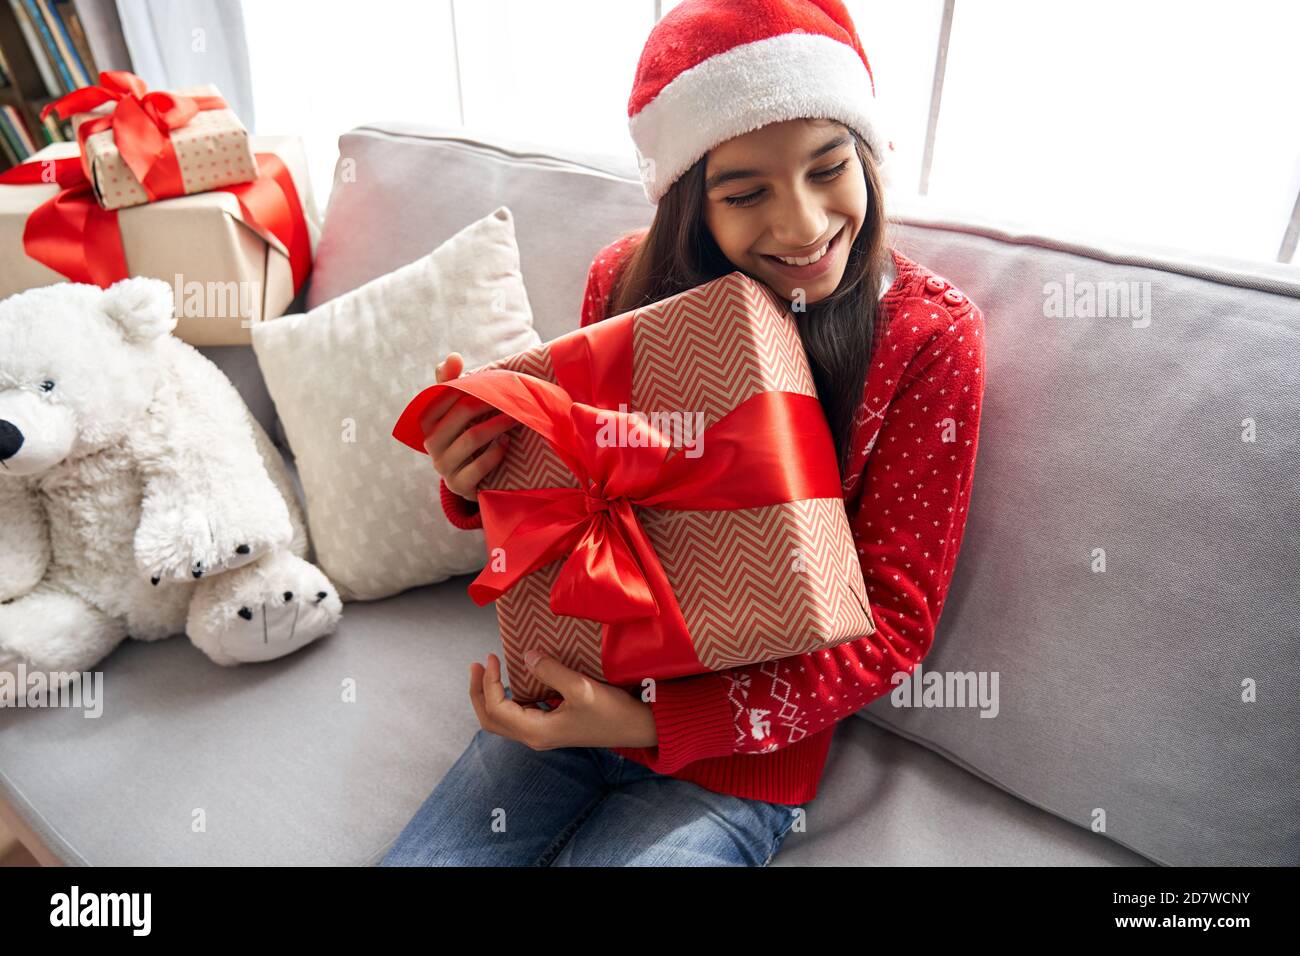 Happy cute indian kid girl holding gift box Christmas present sitting on couch. Stock Photo